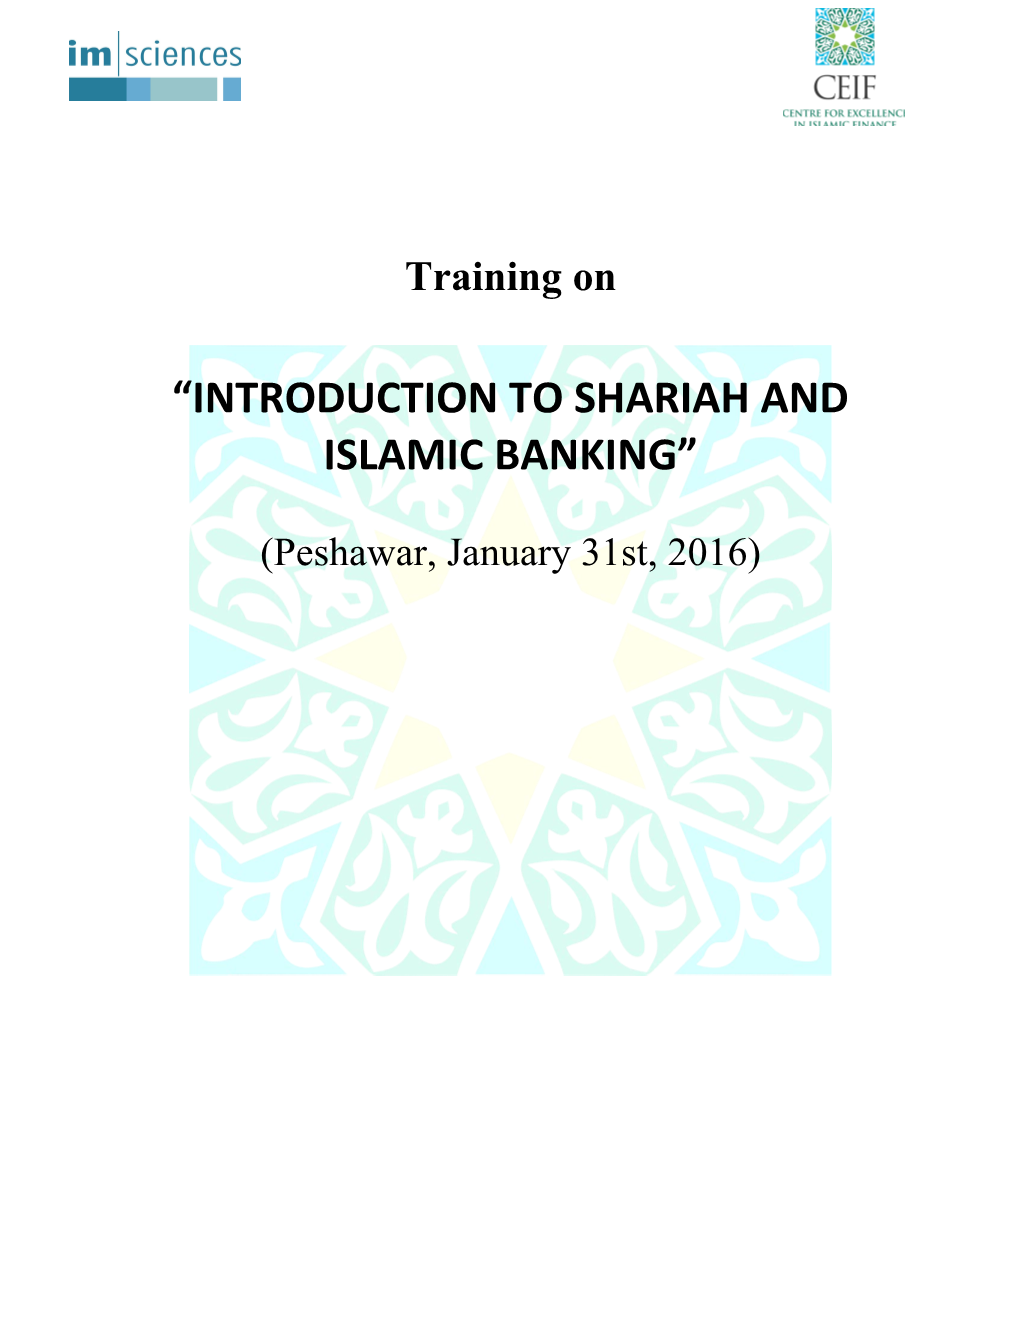 Introduction to Shariah and Islamic Banking